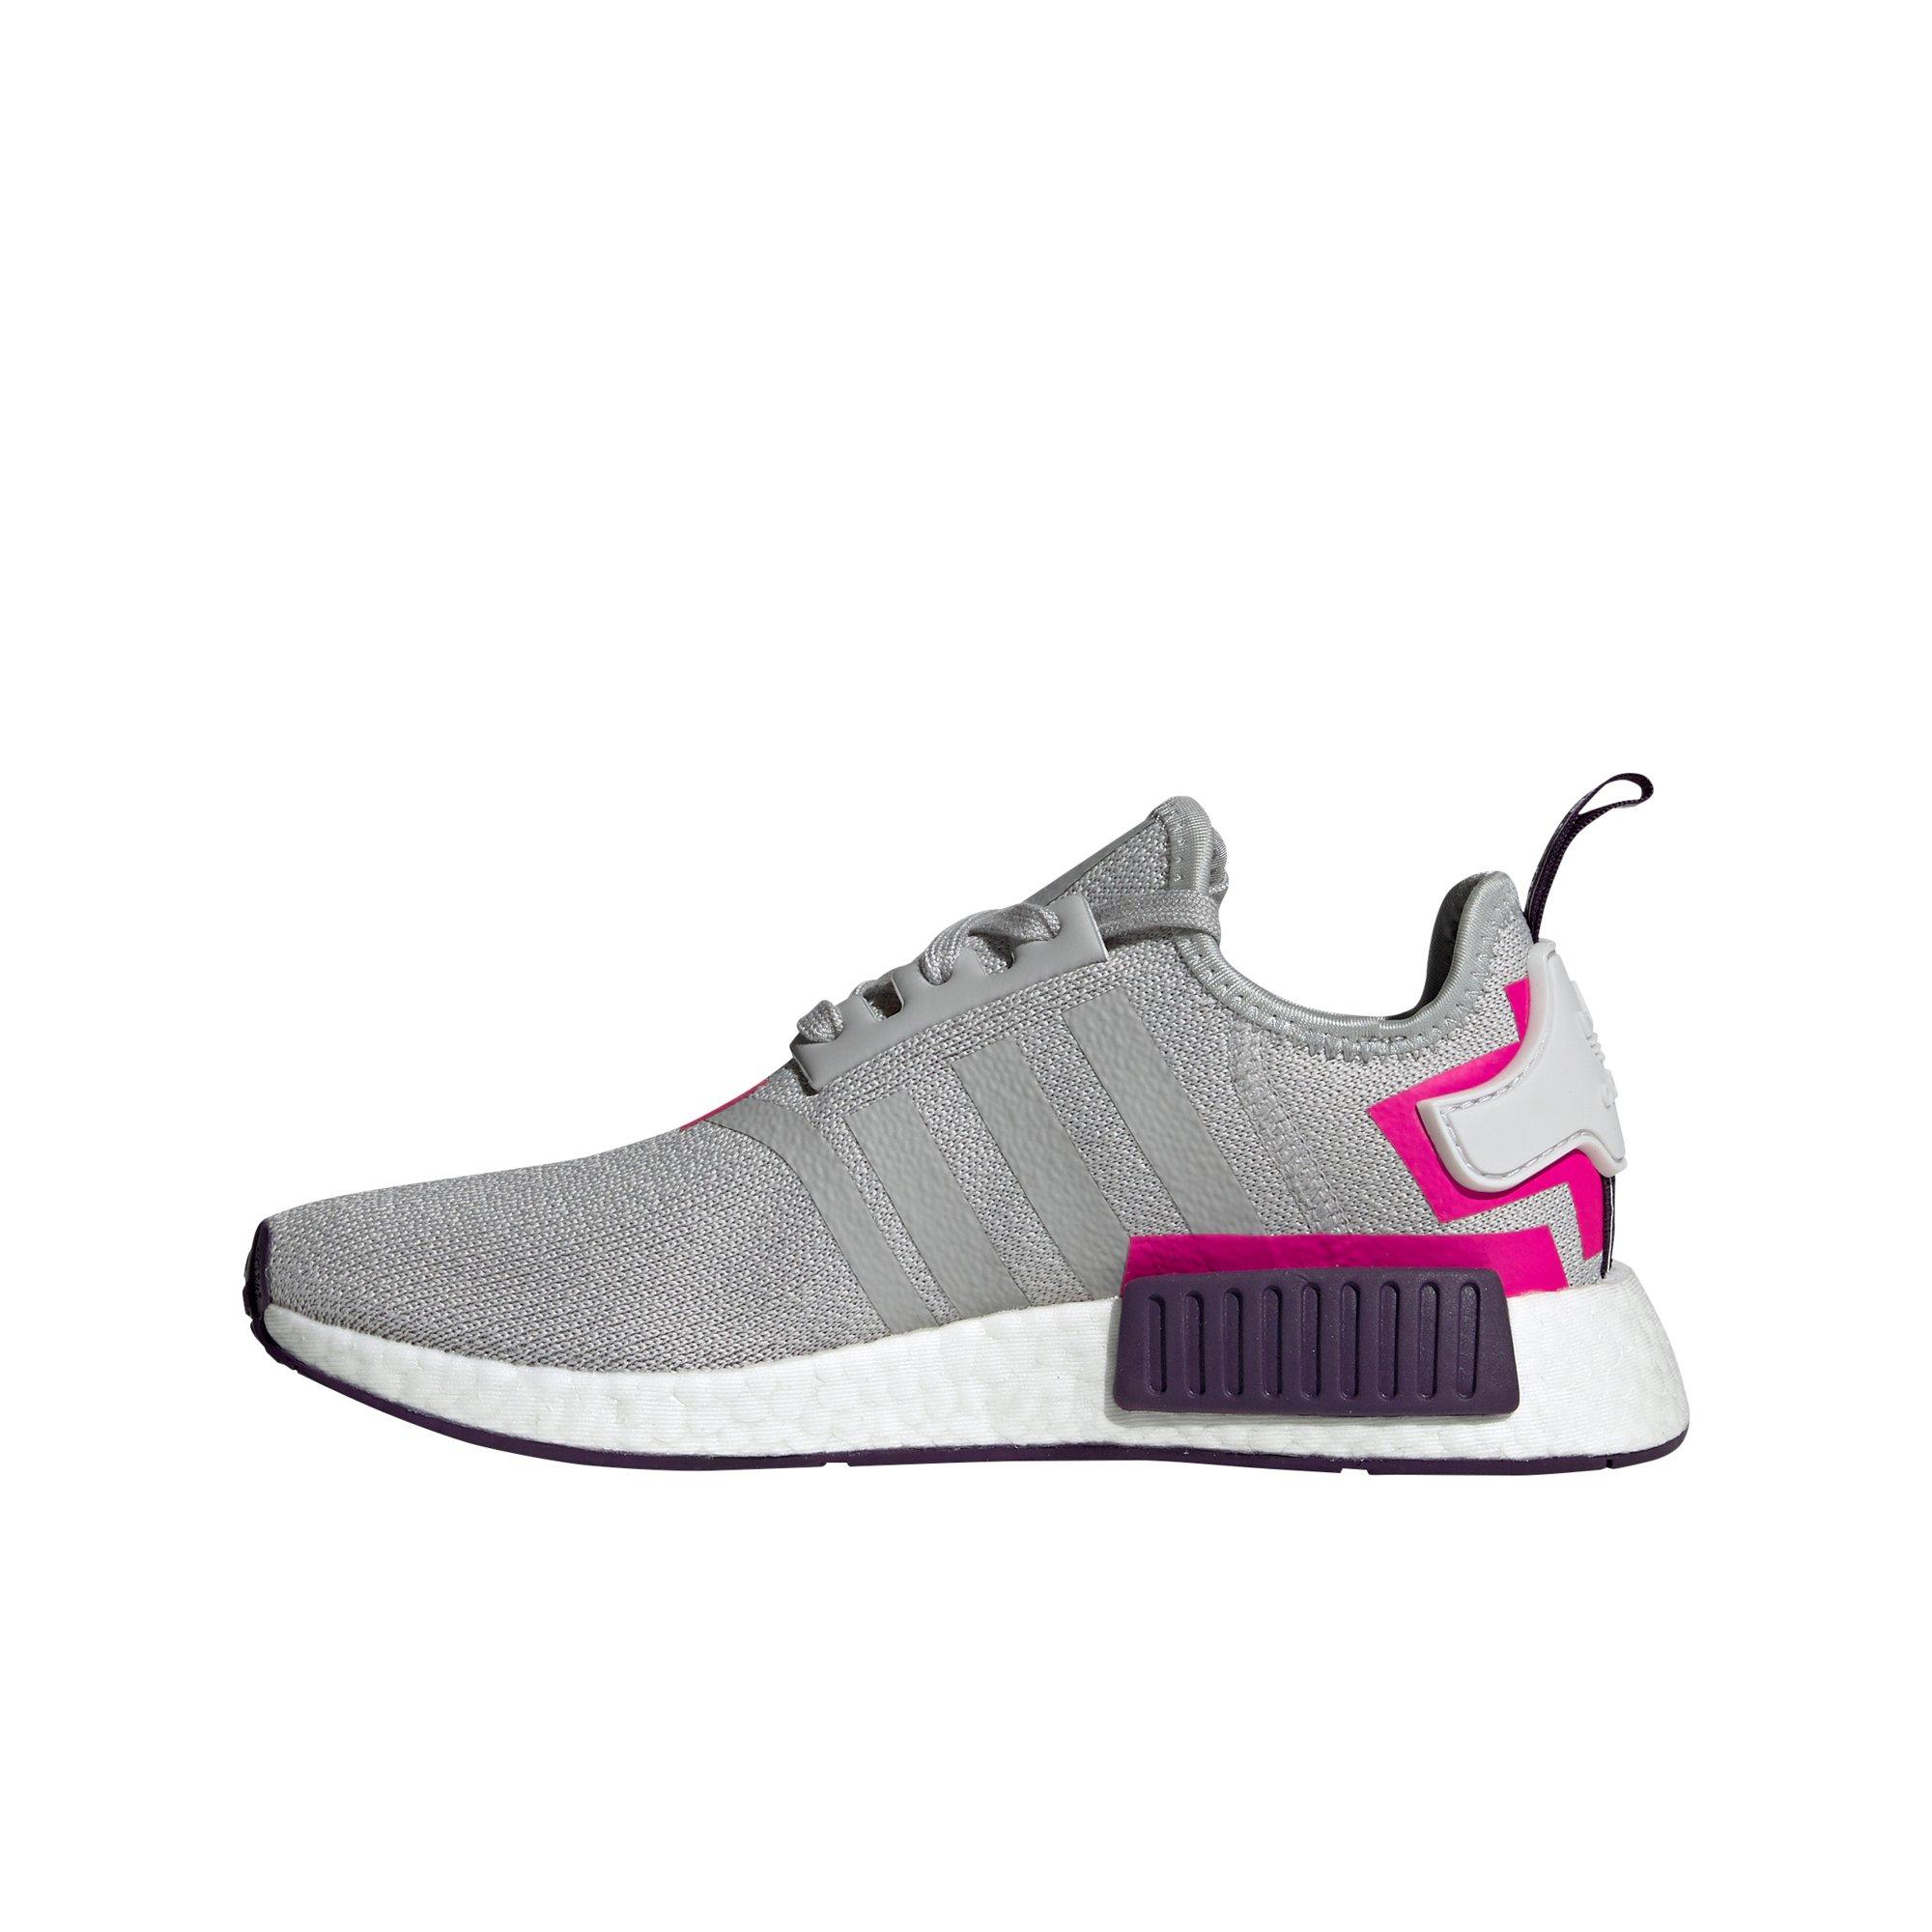 grey and pink nmds women's